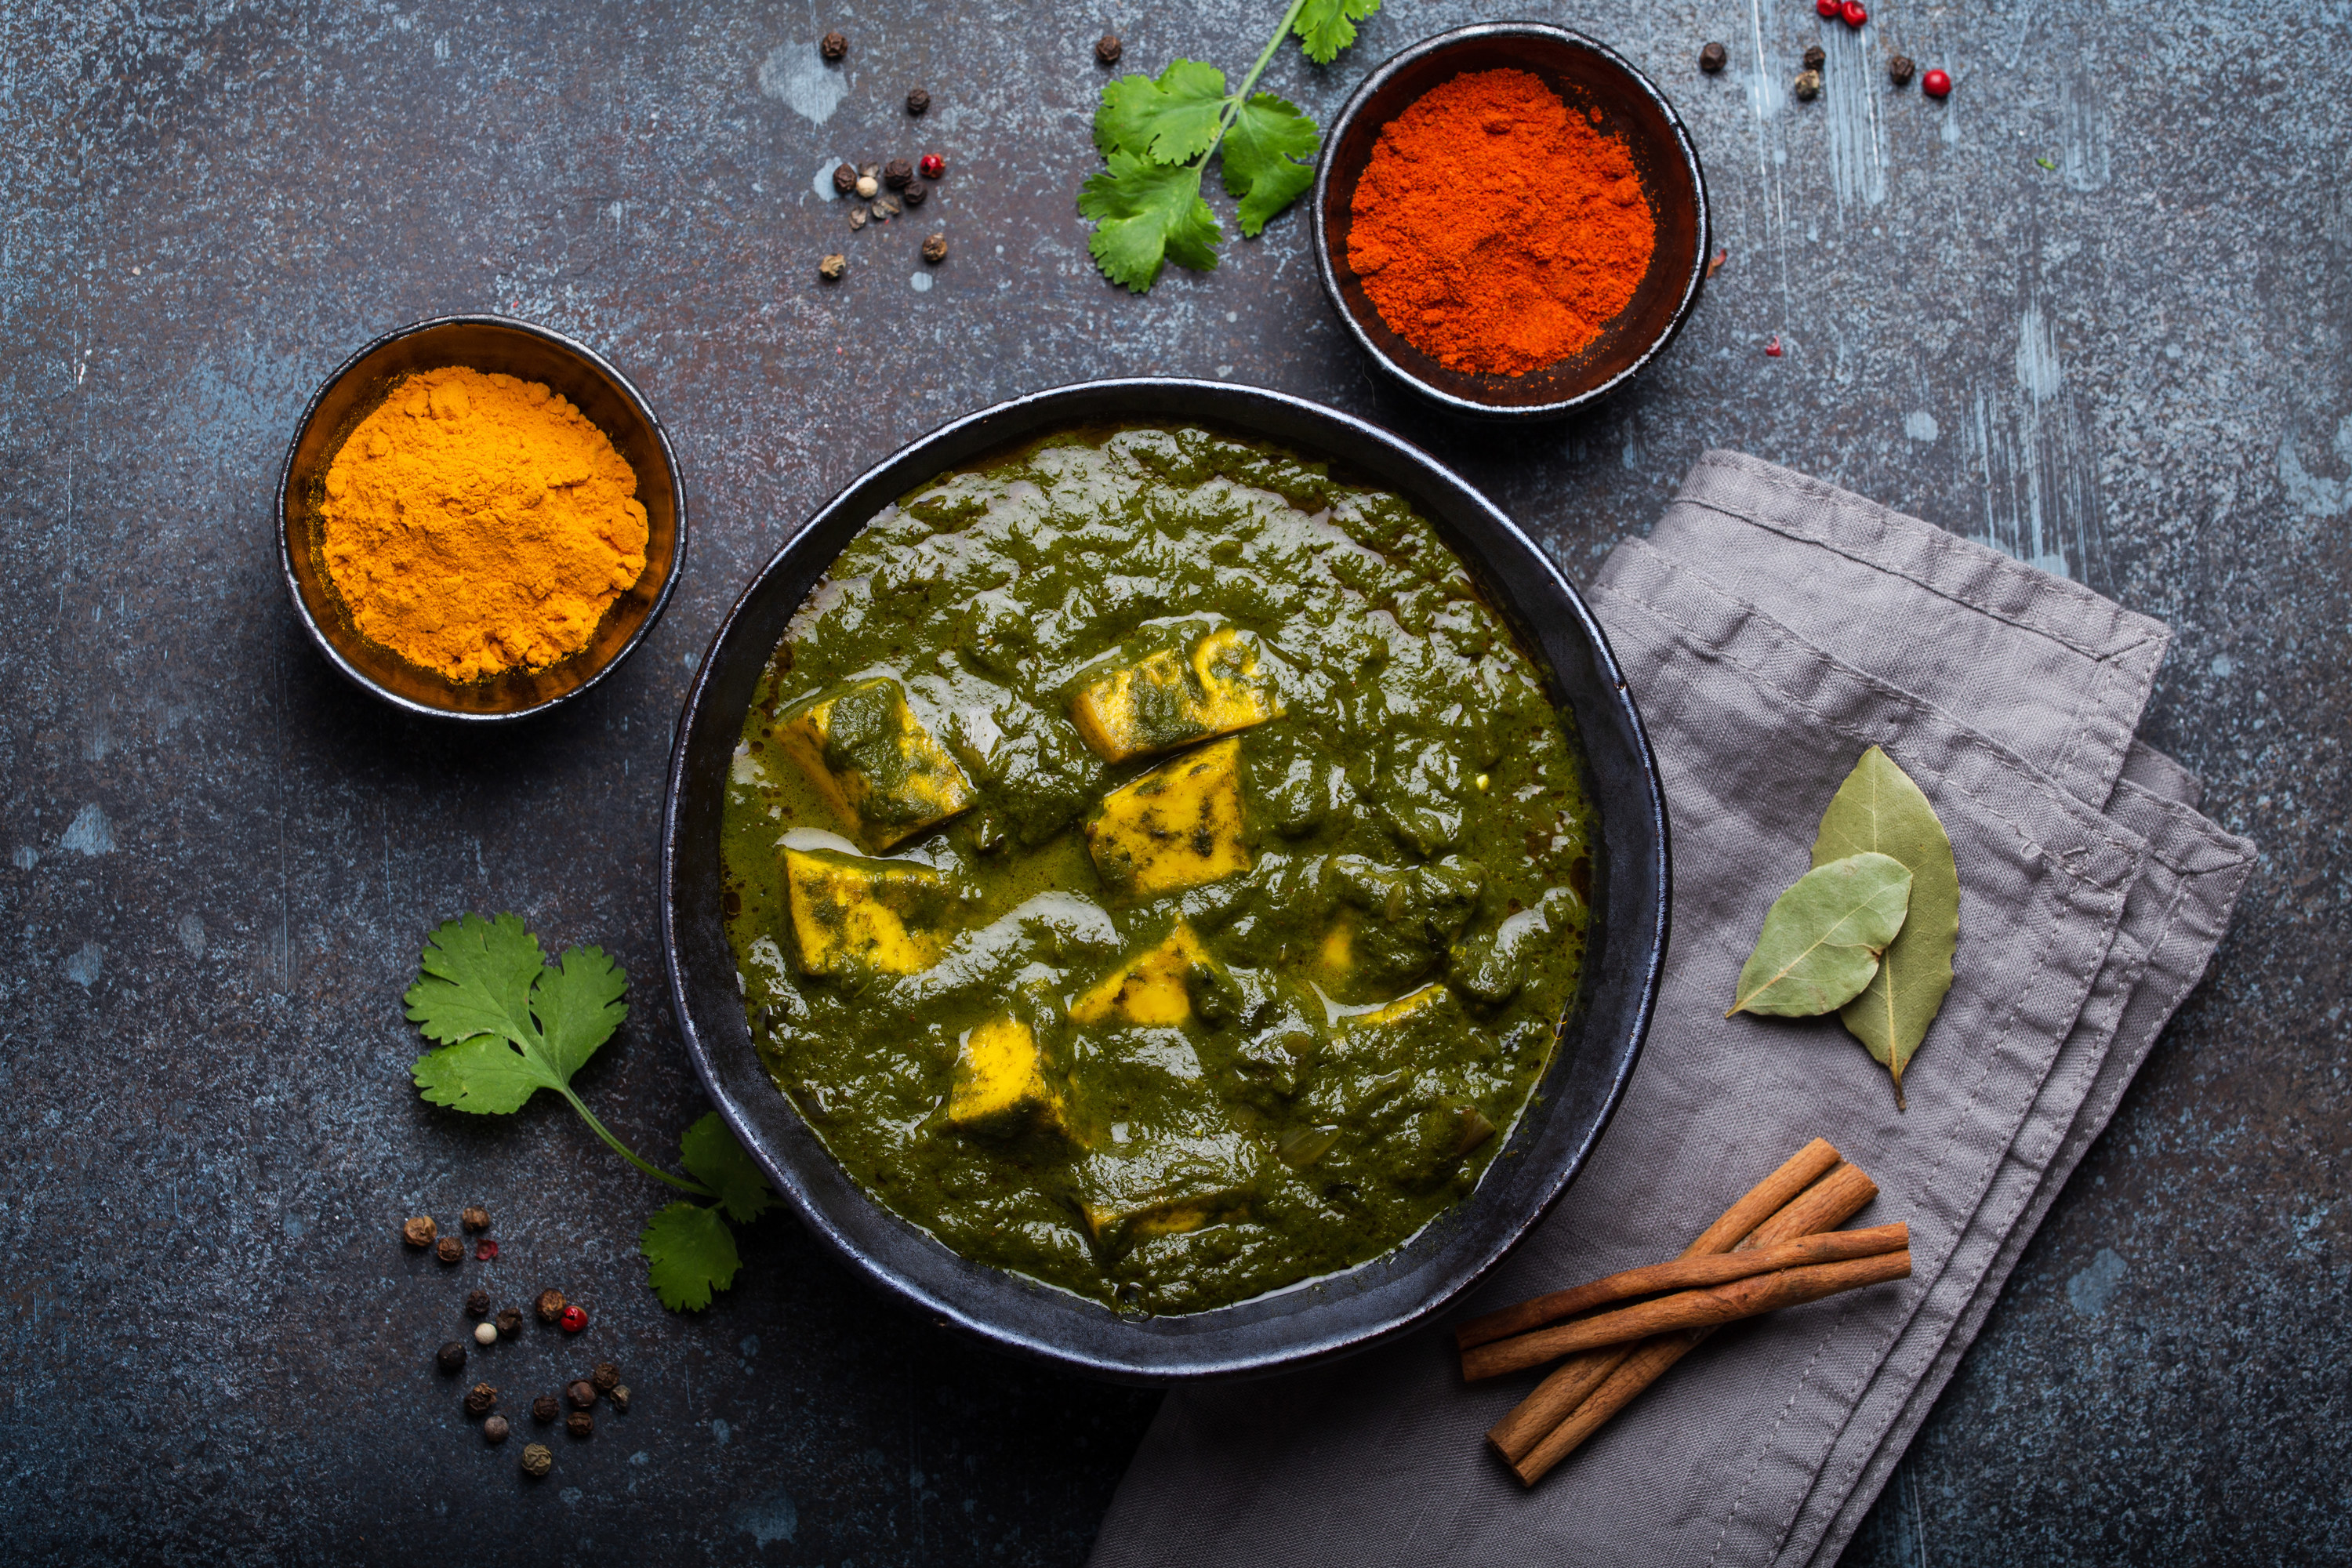 Palak paneer, which is green with white cottage cheese (paneer), is in a black bowl and on top of a light gray napkin. Spices, cilantro, cinnamon sticks, and herbs surround the bowl and are contrasted against a gray background